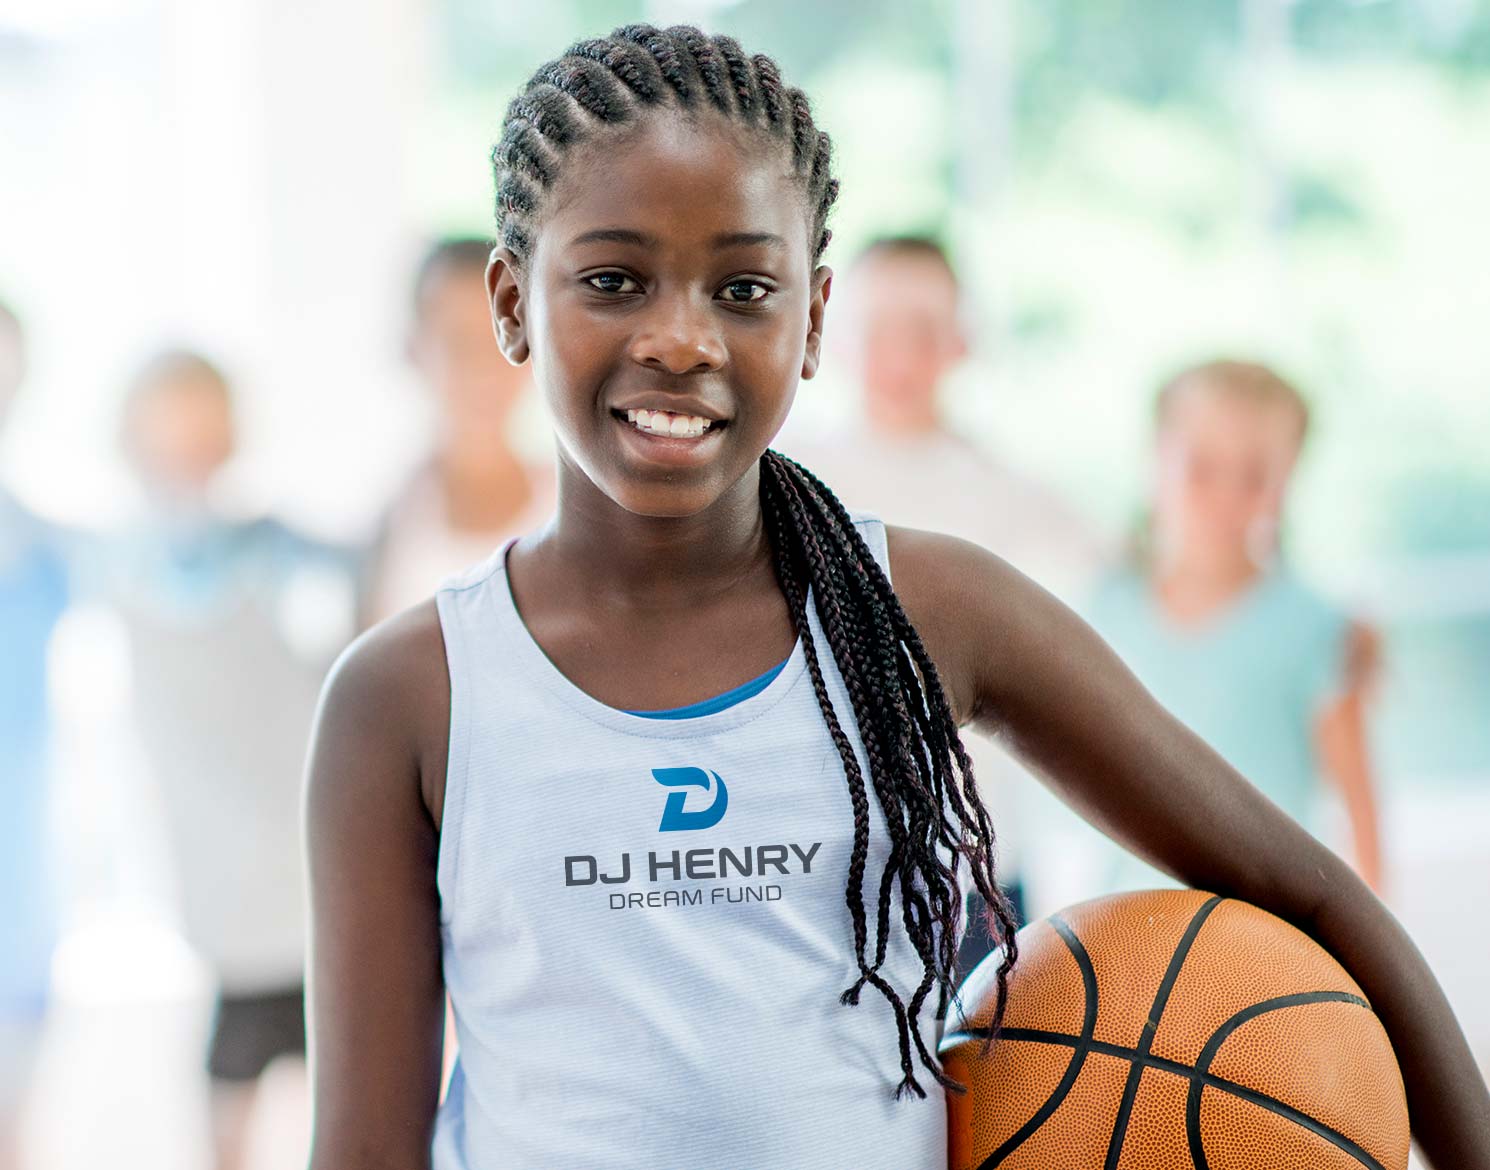 Young child playing basketball wearing shirt with DJ Henry Dream Fund logo